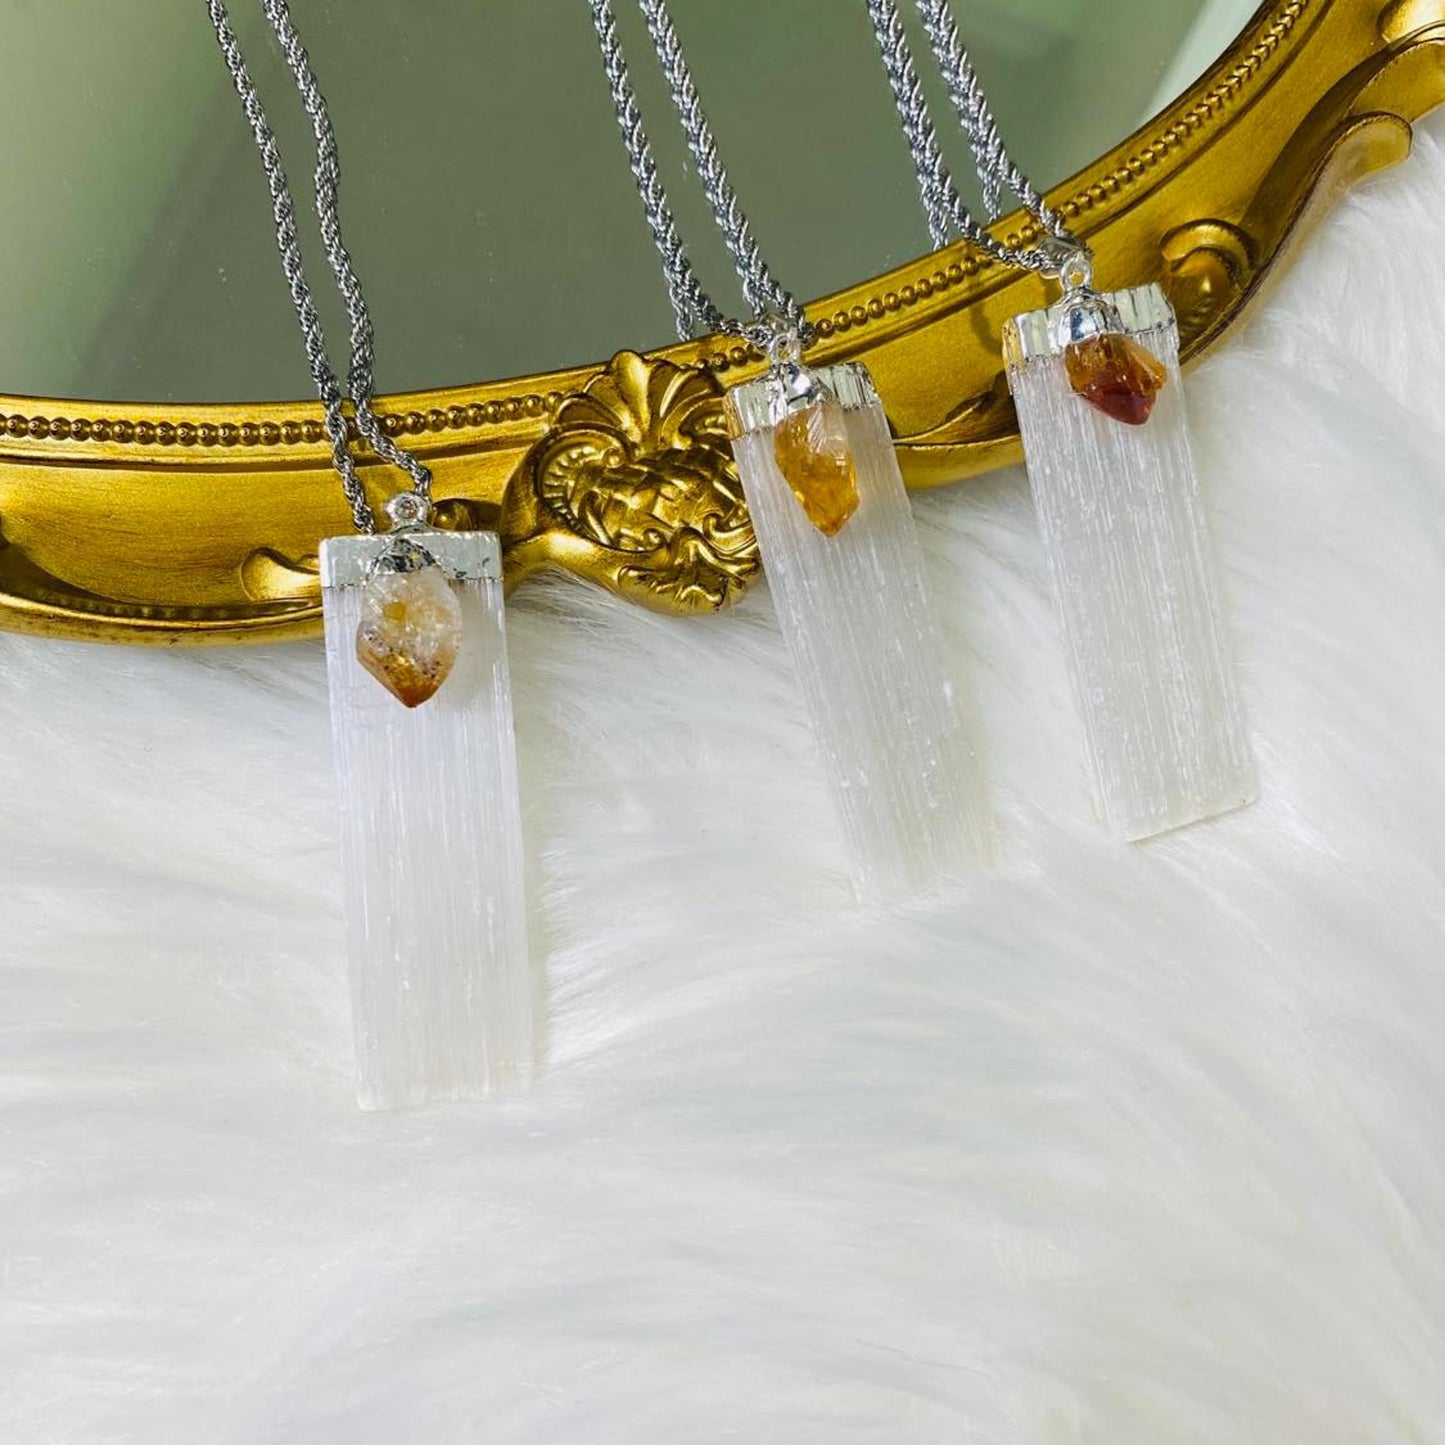 Selenite Crystal Pendant with Citrine, Stone for Cleansing and Wealth